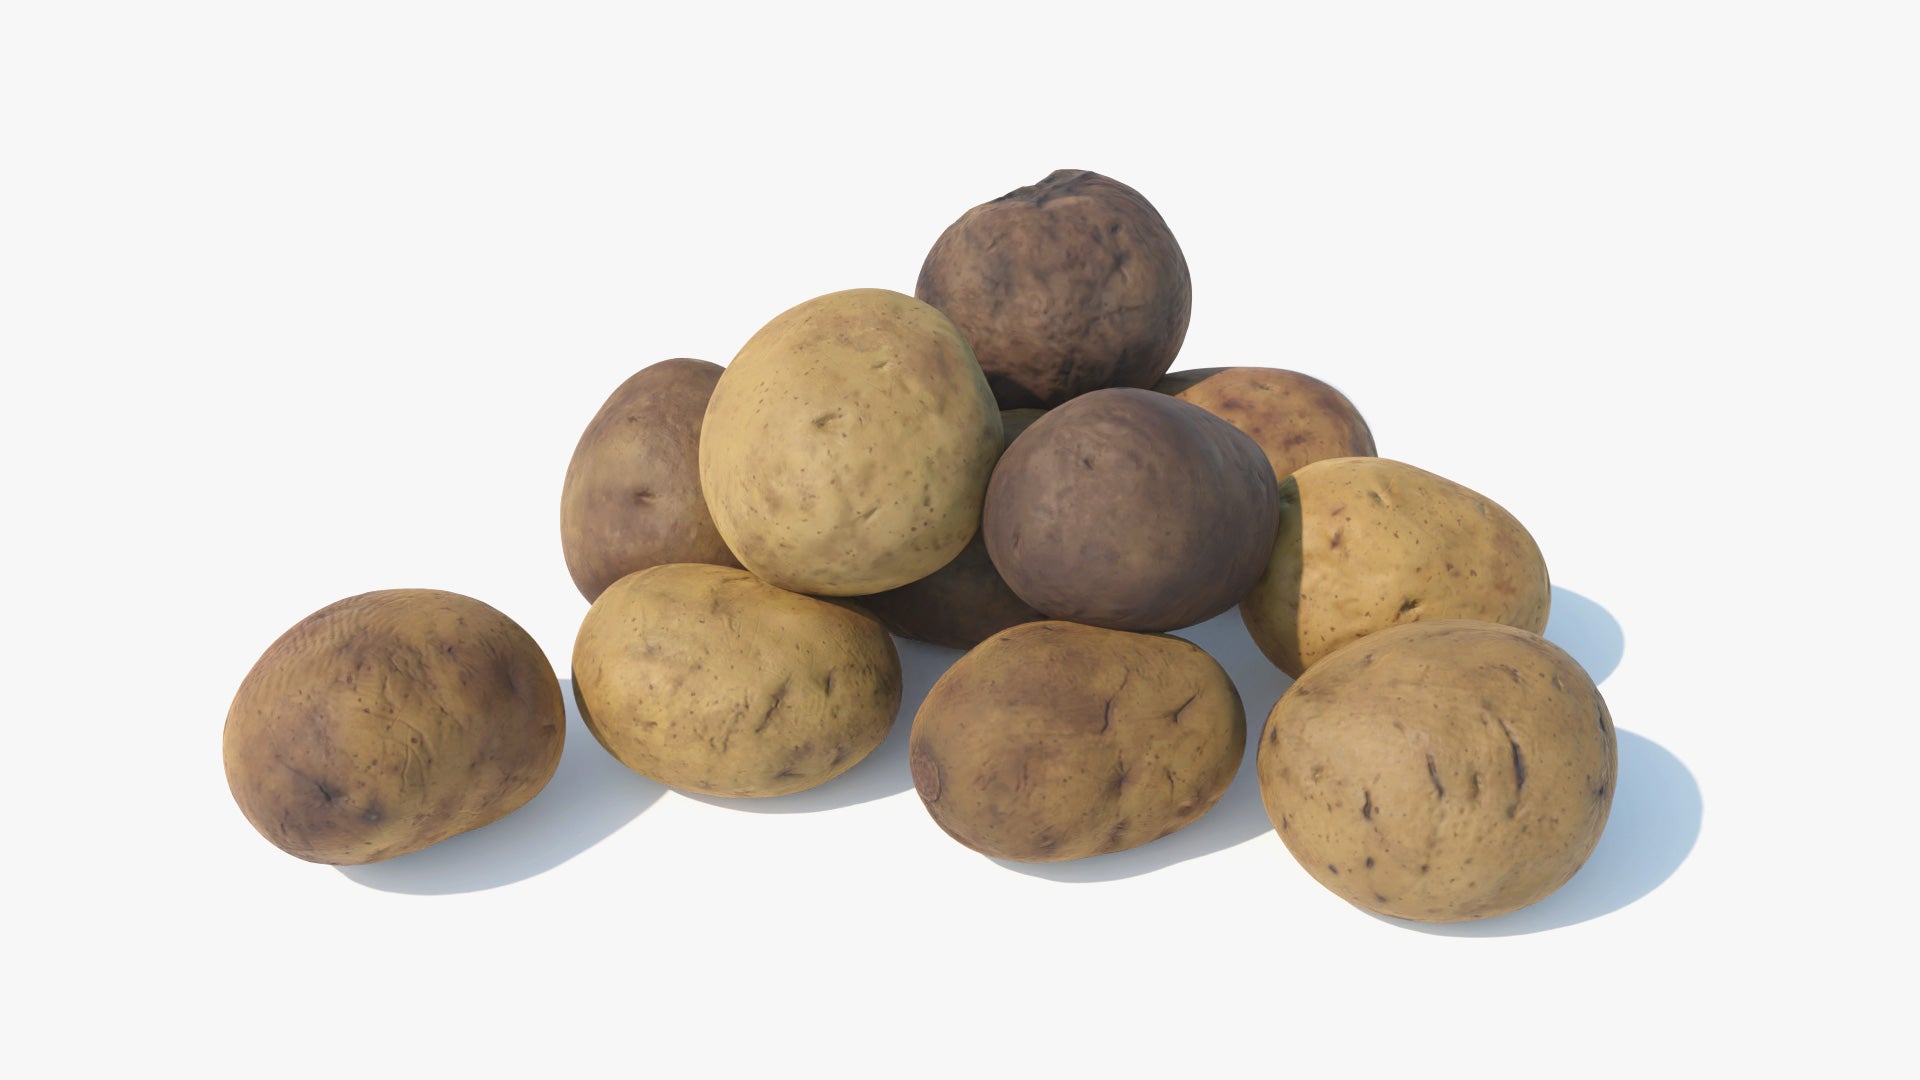 #D model of a group of 12 potatoes of wich 4 are clean, 4 are dirty, and 4 are old. Lowpoly and PBR materials make this a great game asset, perfect for the metaverse